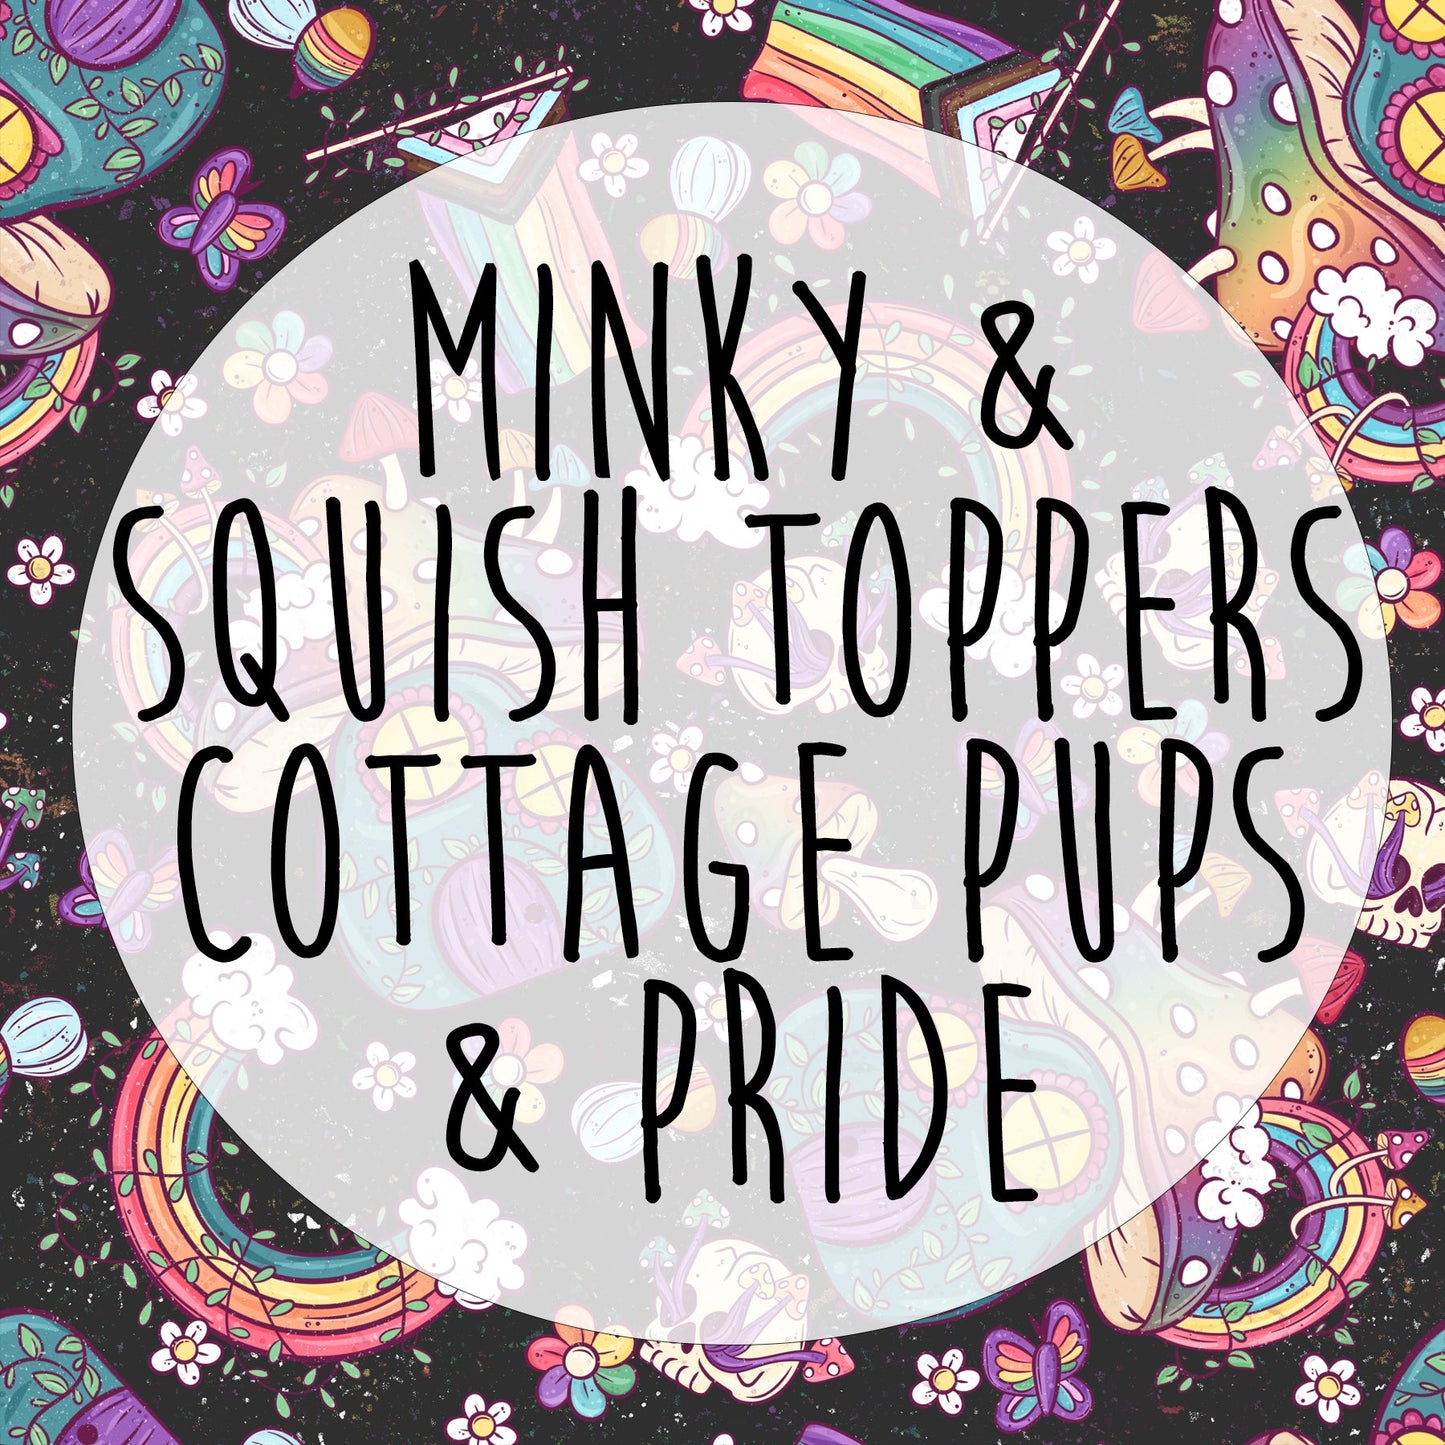 Minky or Squish - Blanket Toppers Round YY Retail Pride, Cottage pups, Mushroom House & PixelCass